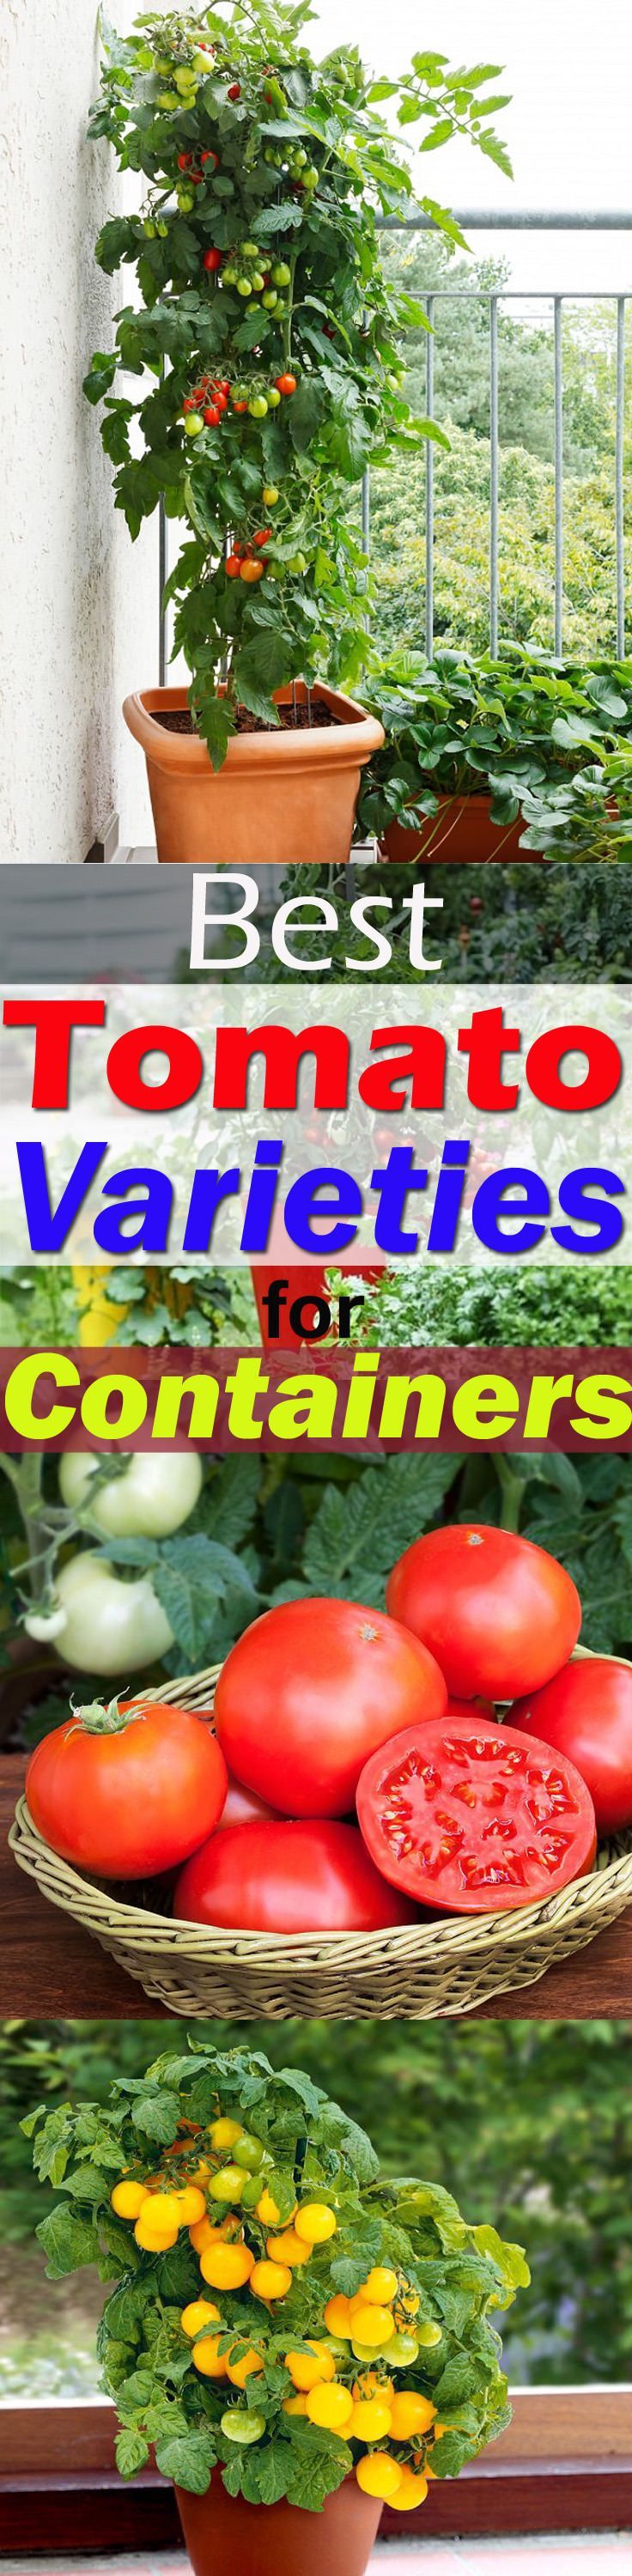 It is possible to grow tomatoes in pots, but there are a few BEST TOMATO VARIETIES FOR CONTAINERS that are easy to grow, taste